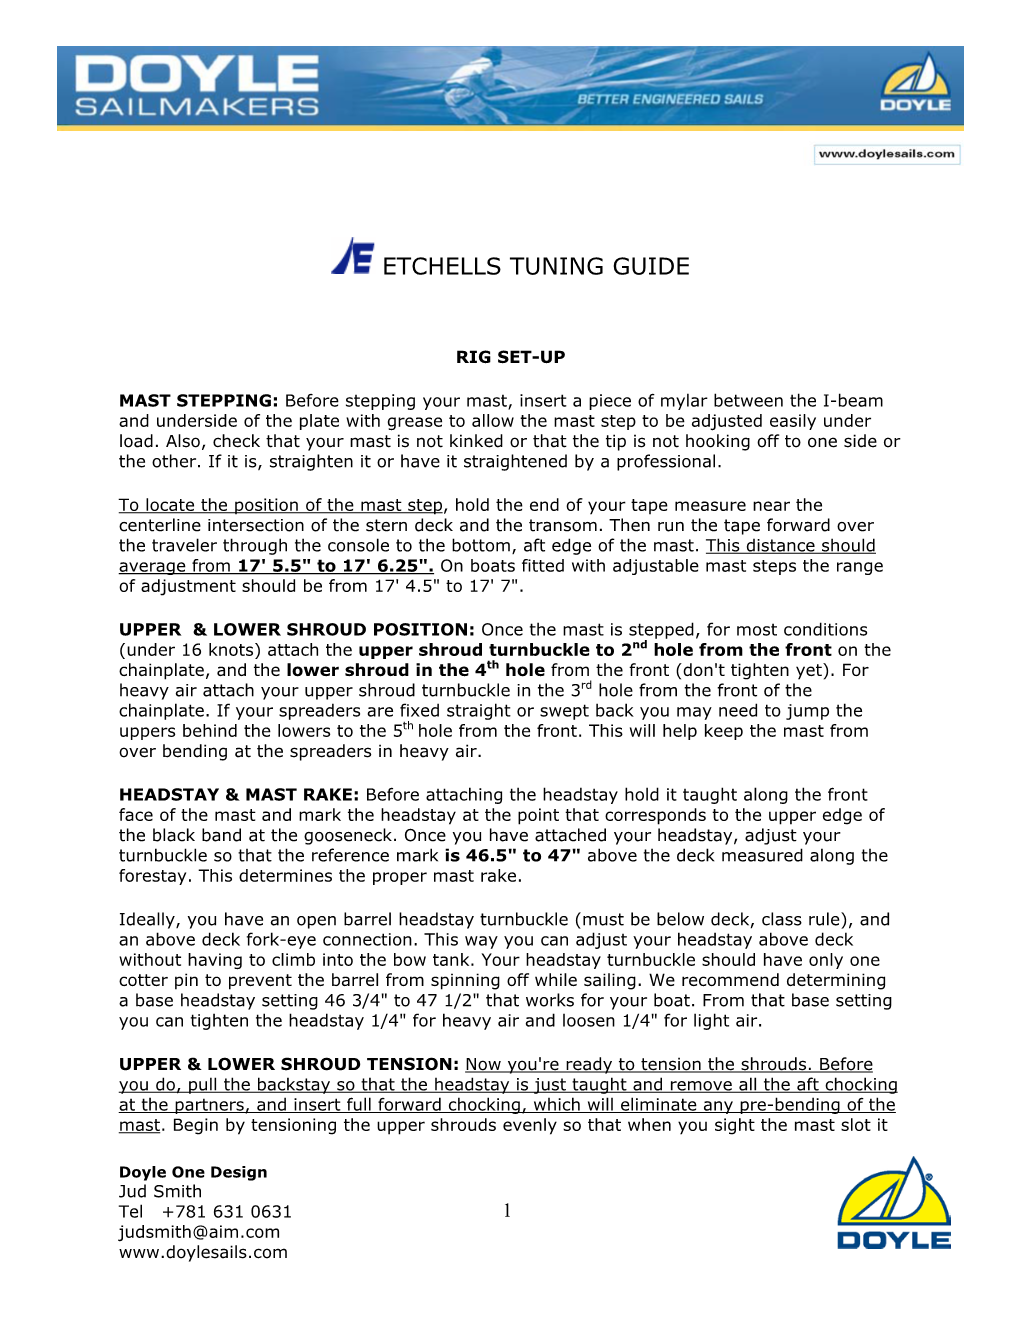 Etchells Tuning Guide